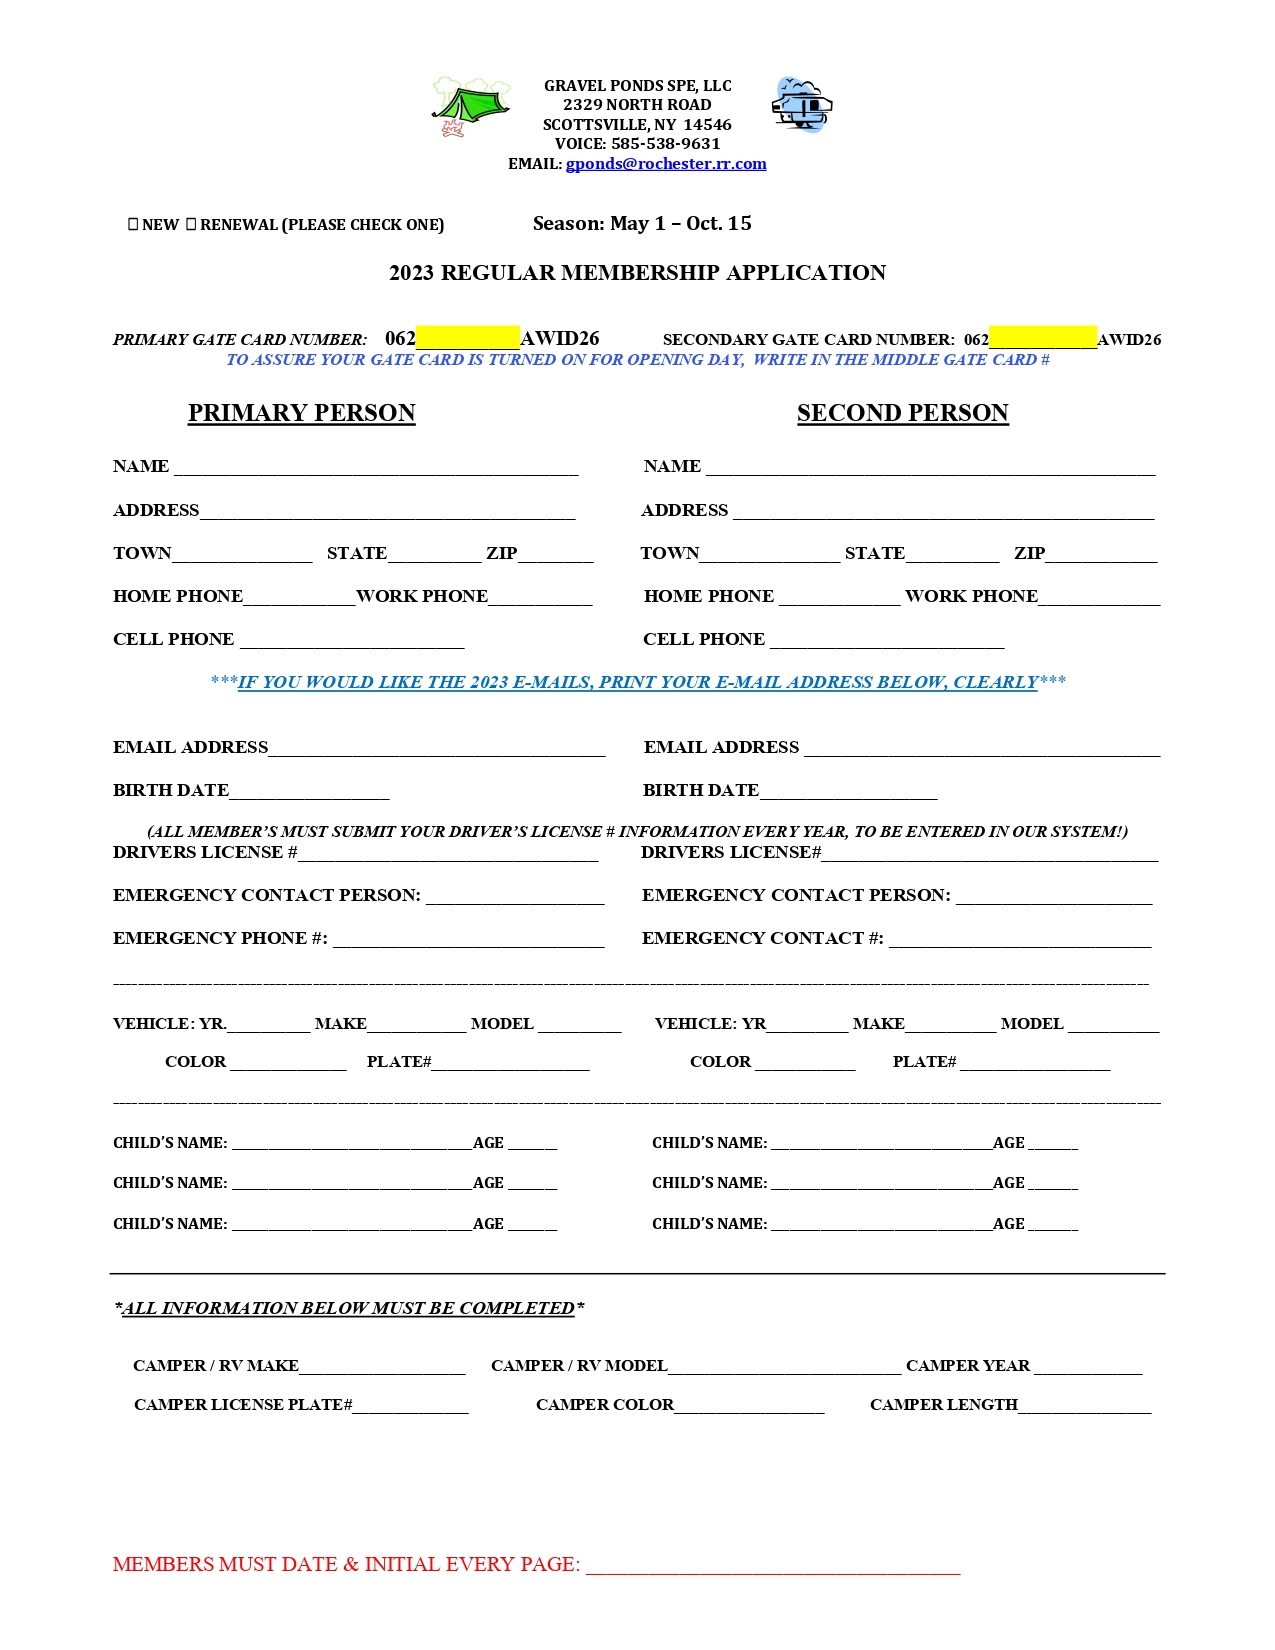 2023 GP REGUAR MEMBERSHIP APPLICATION AND RULES_pages-to-jpg-0001